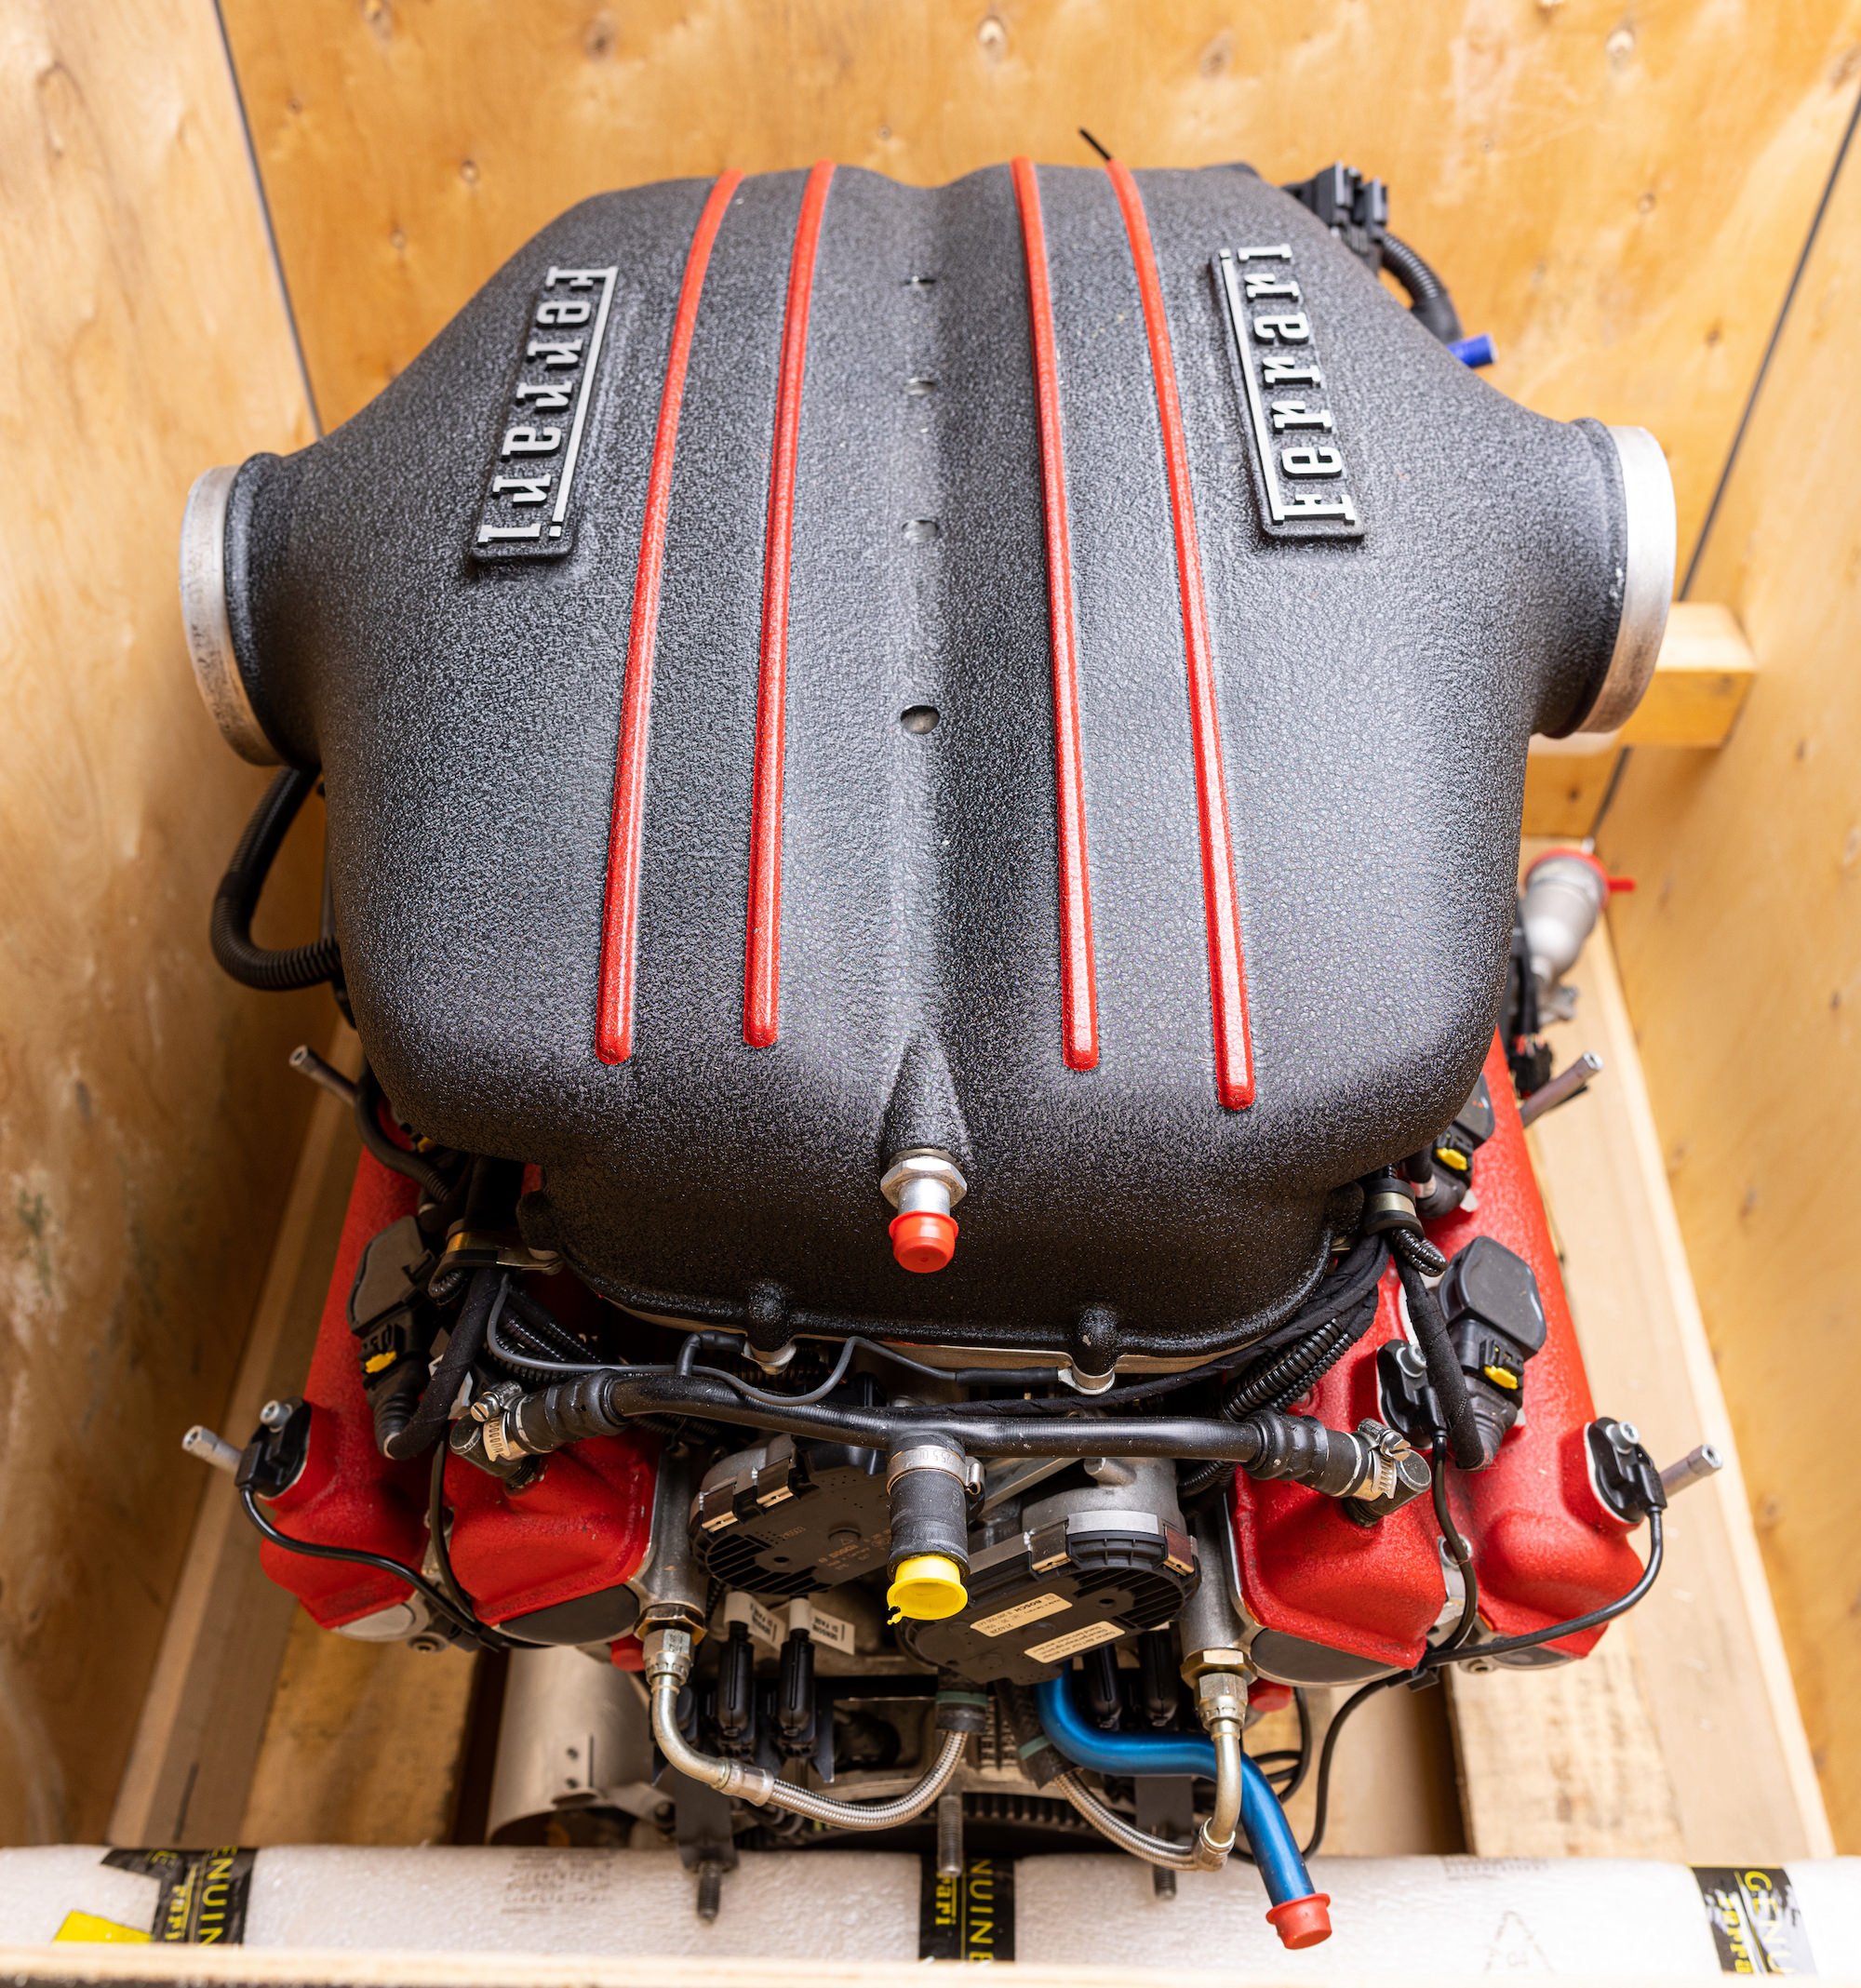 This Ferrari Enzo V12 Crate Engine For Sale Is Ready for the